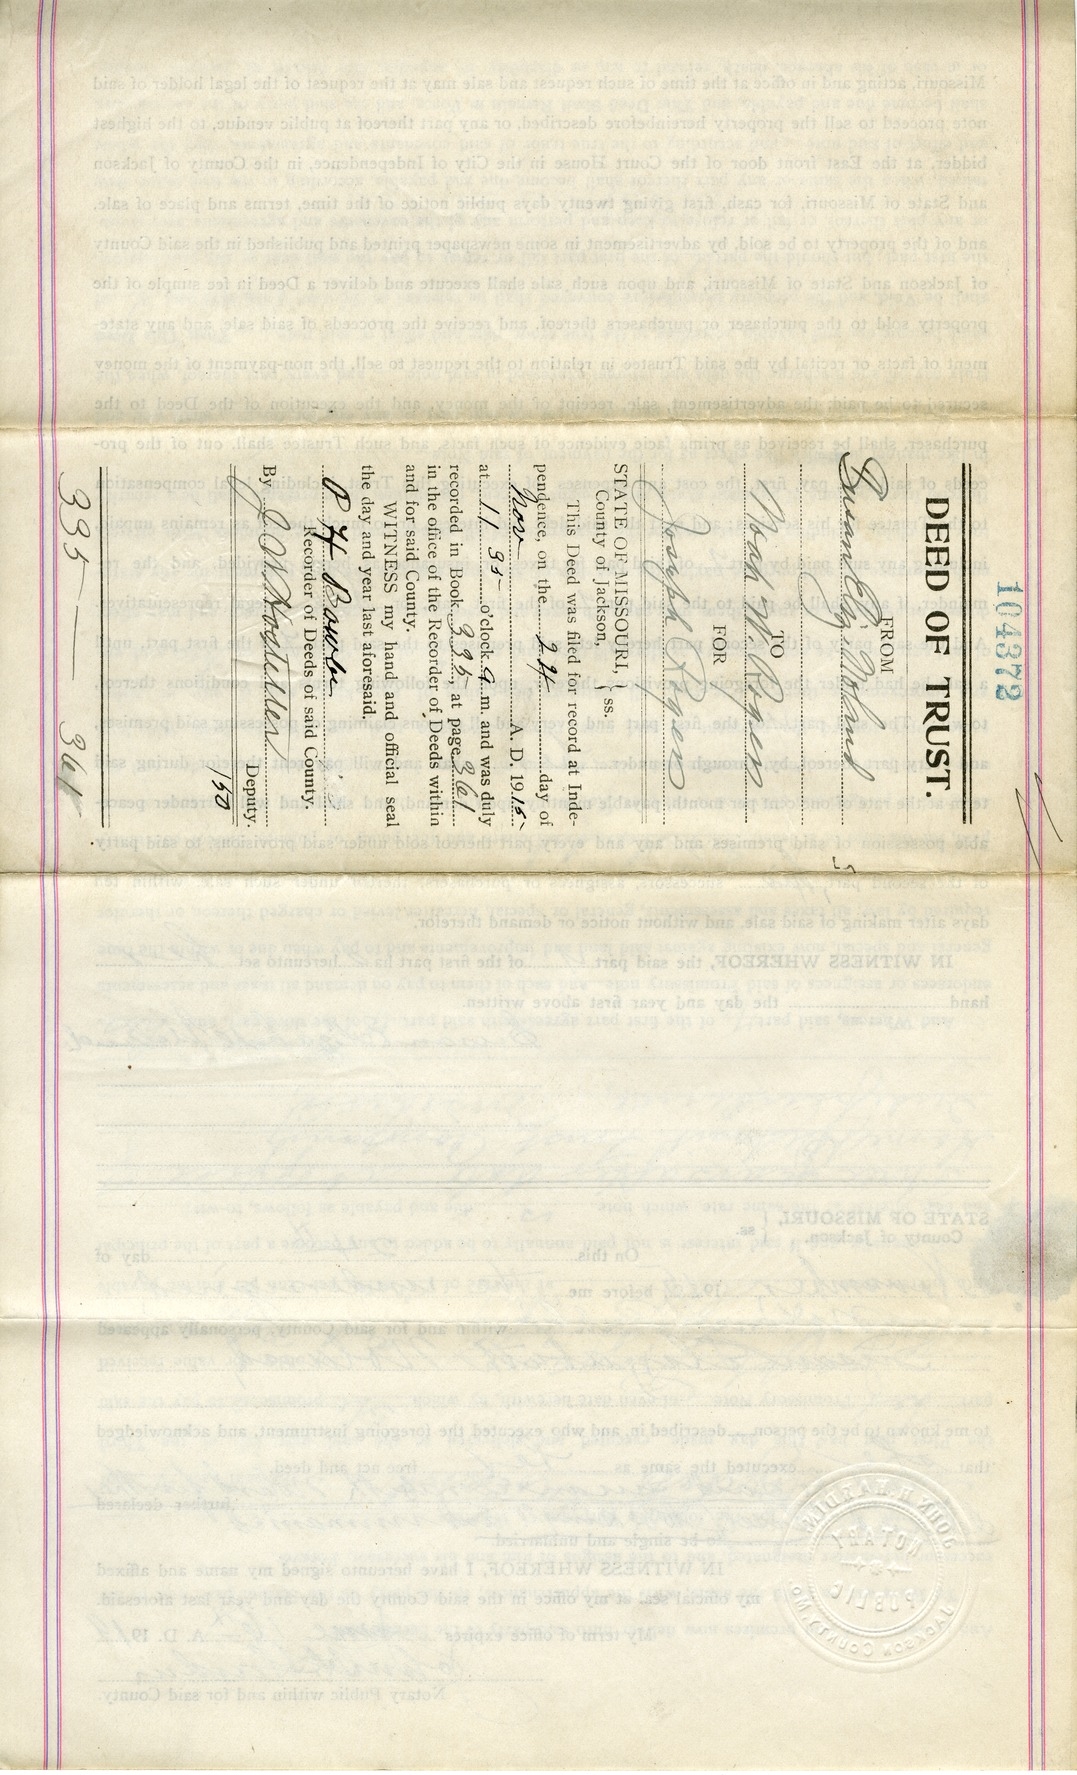 Deed of Trust from Susan Elizabeth Noland to Noah W. Rogers for Joseph Rogers